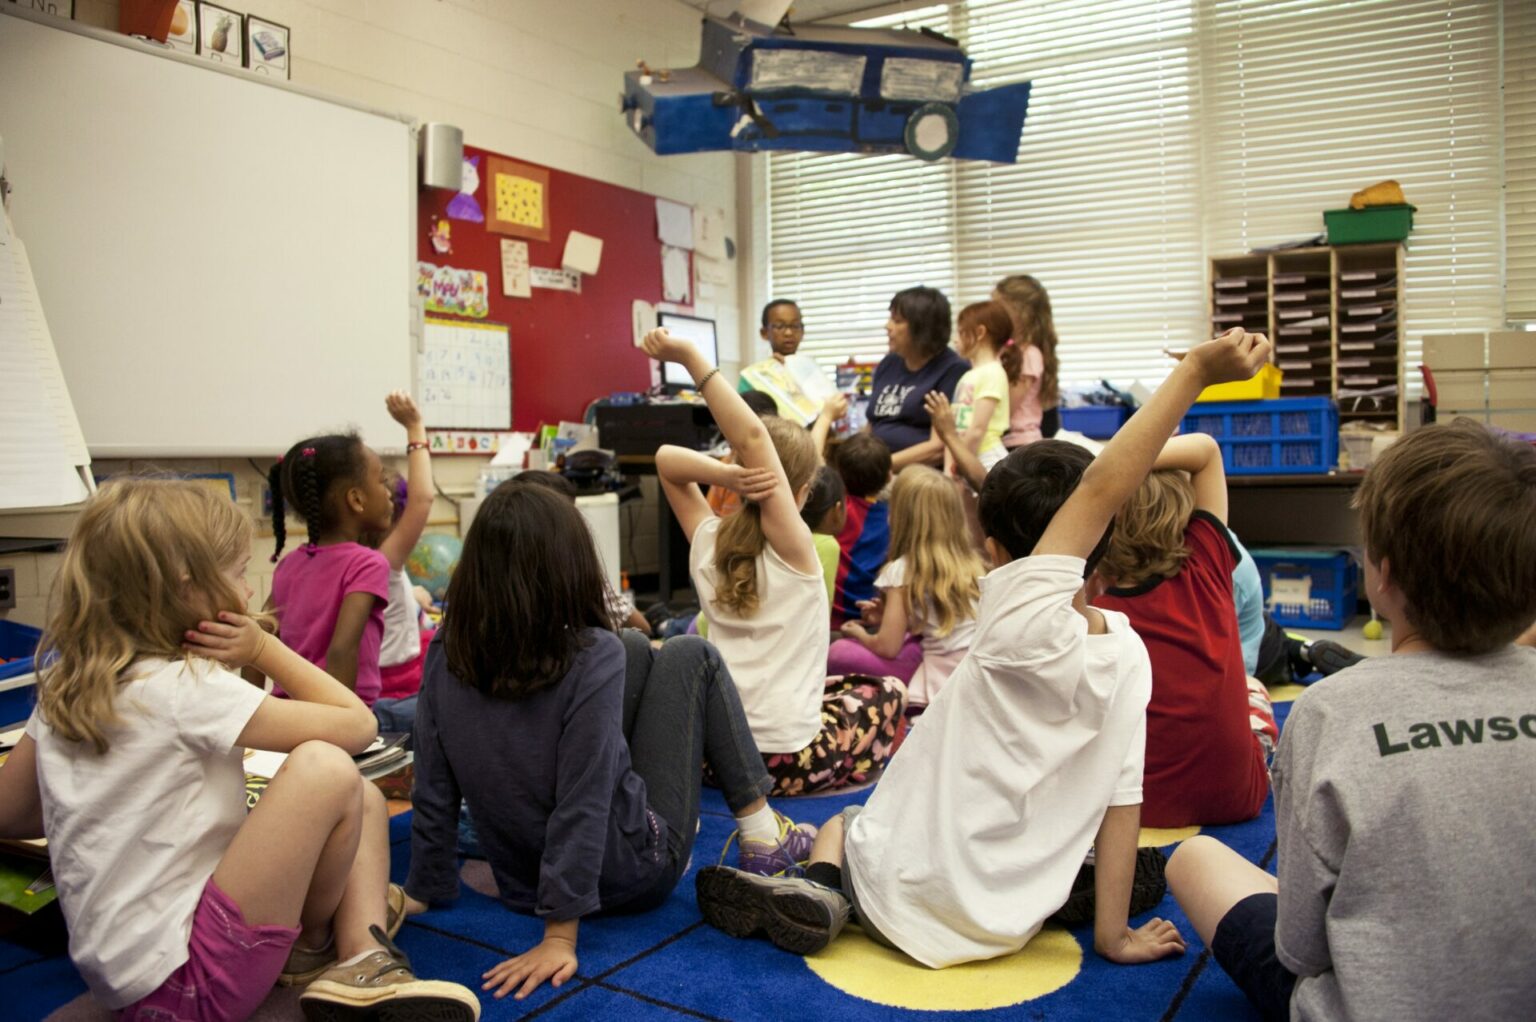 a picture of children sitting on the floor and raising hands for discussion, in a colourful classroom